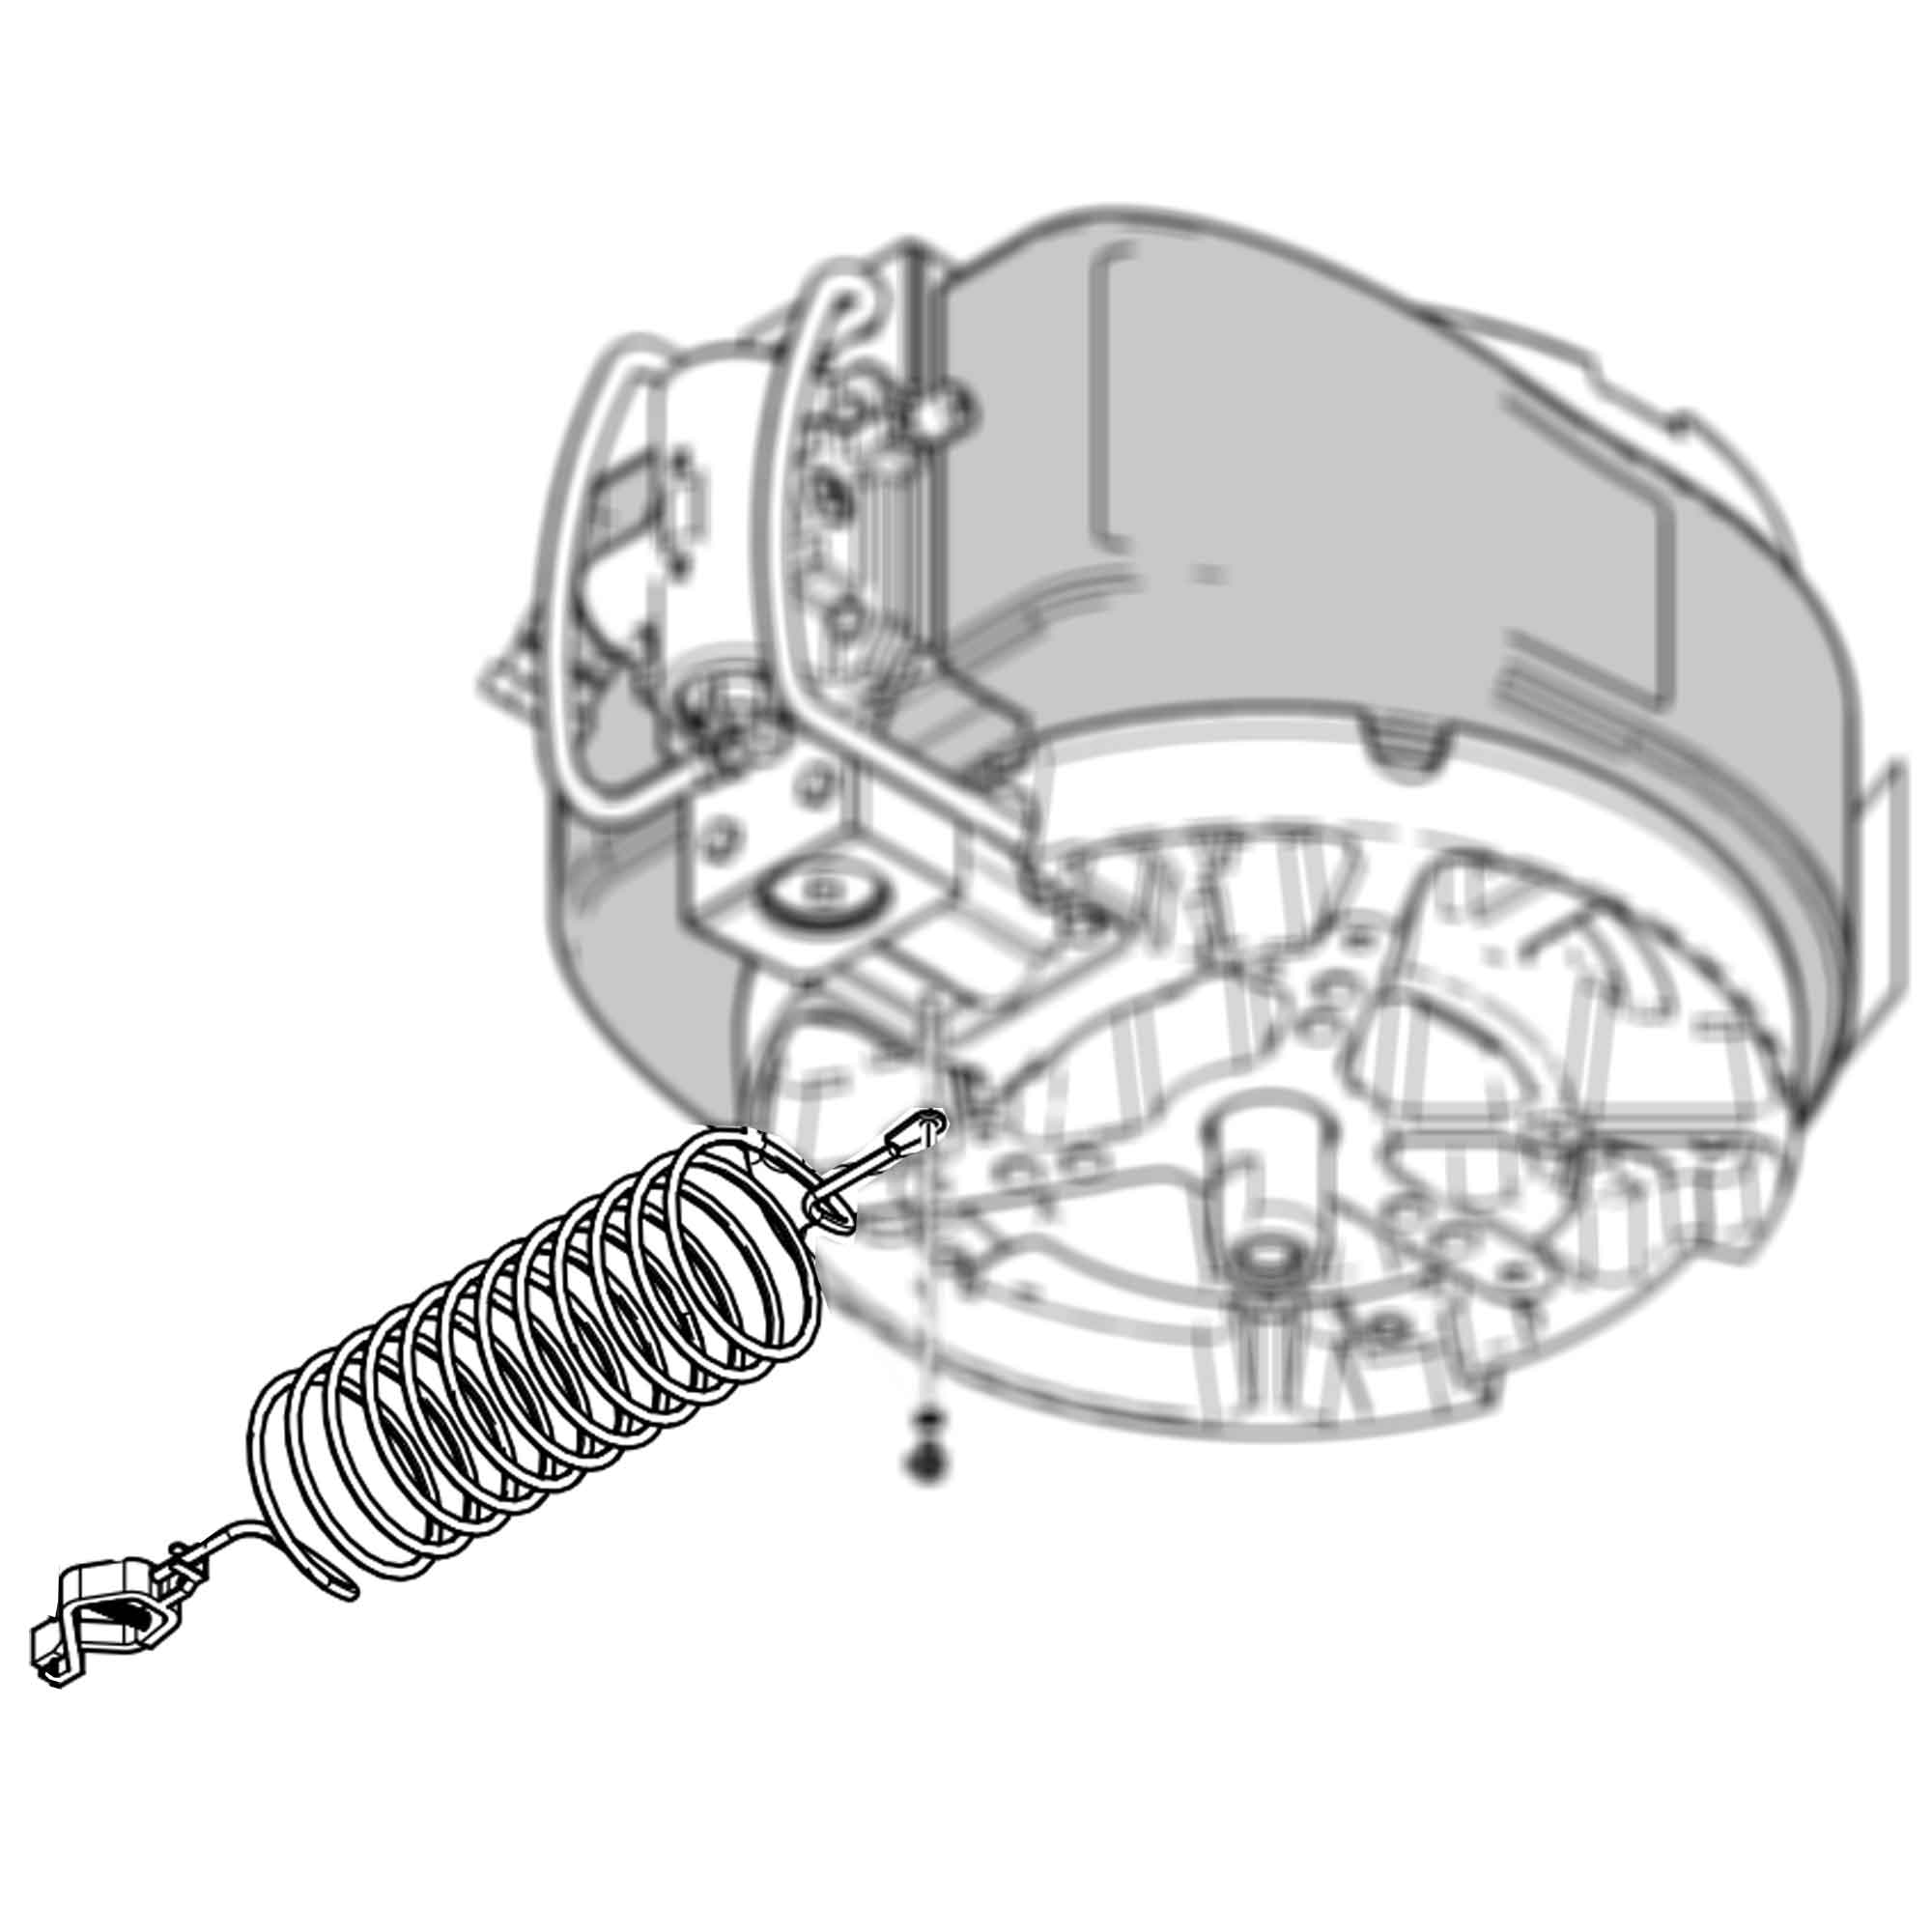 244524 - Grounding, Wire Assembly w/clamp - PURspray